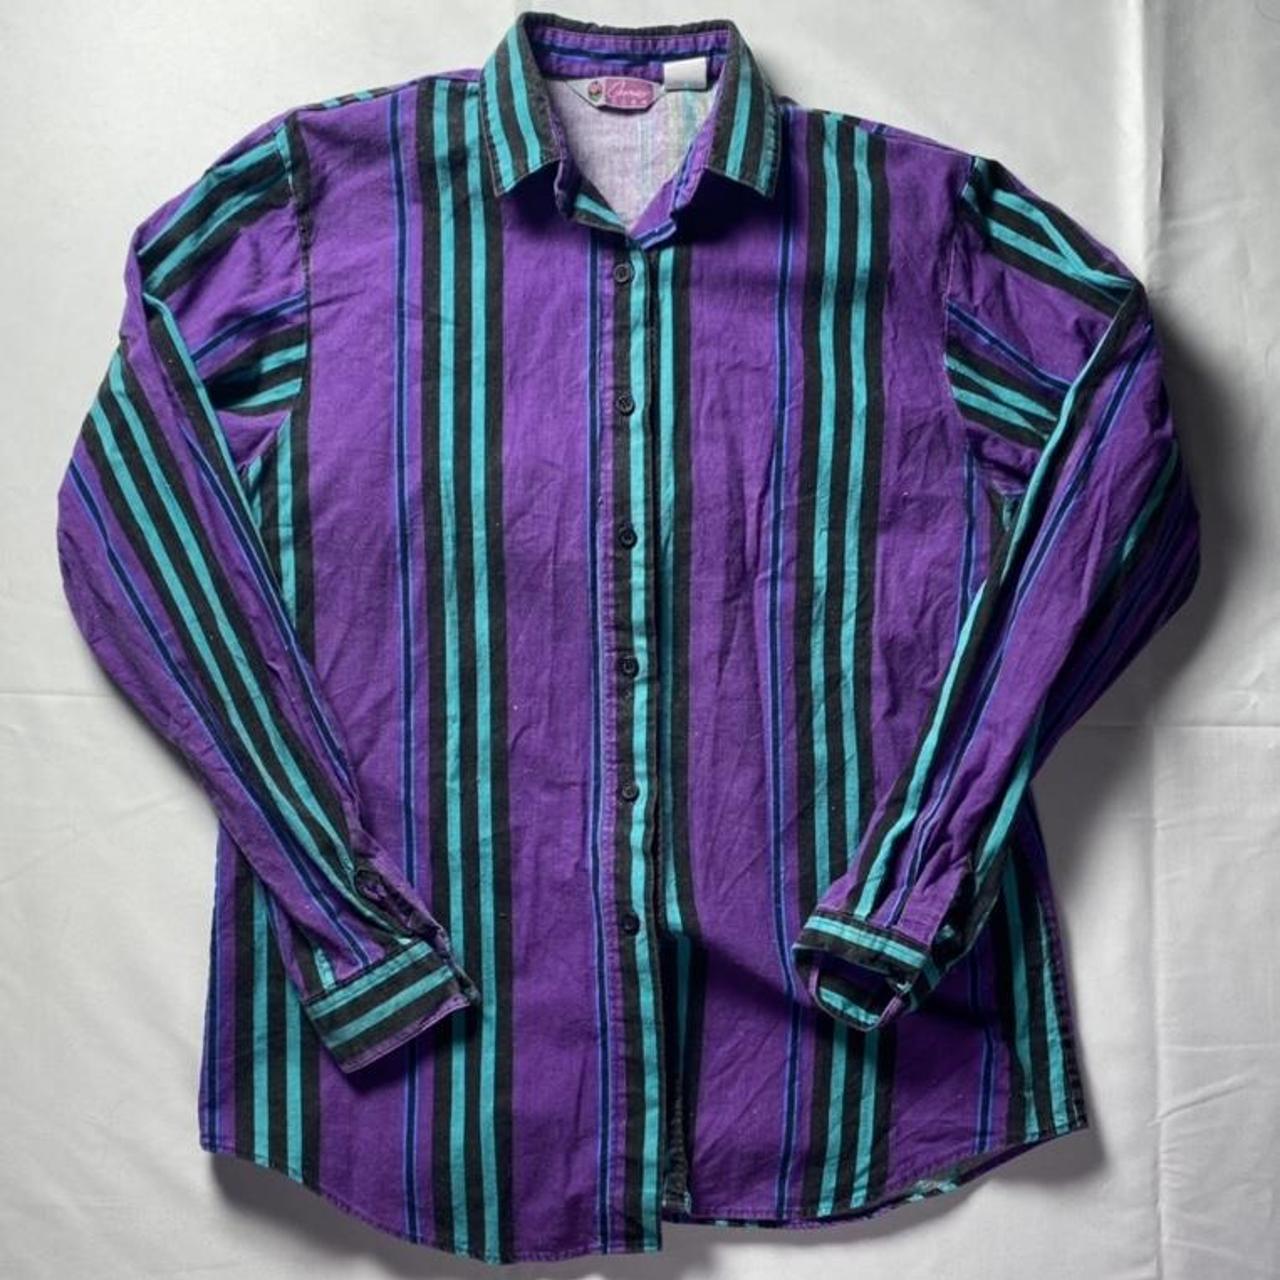 Product Image 1 - Purple and teal striped long